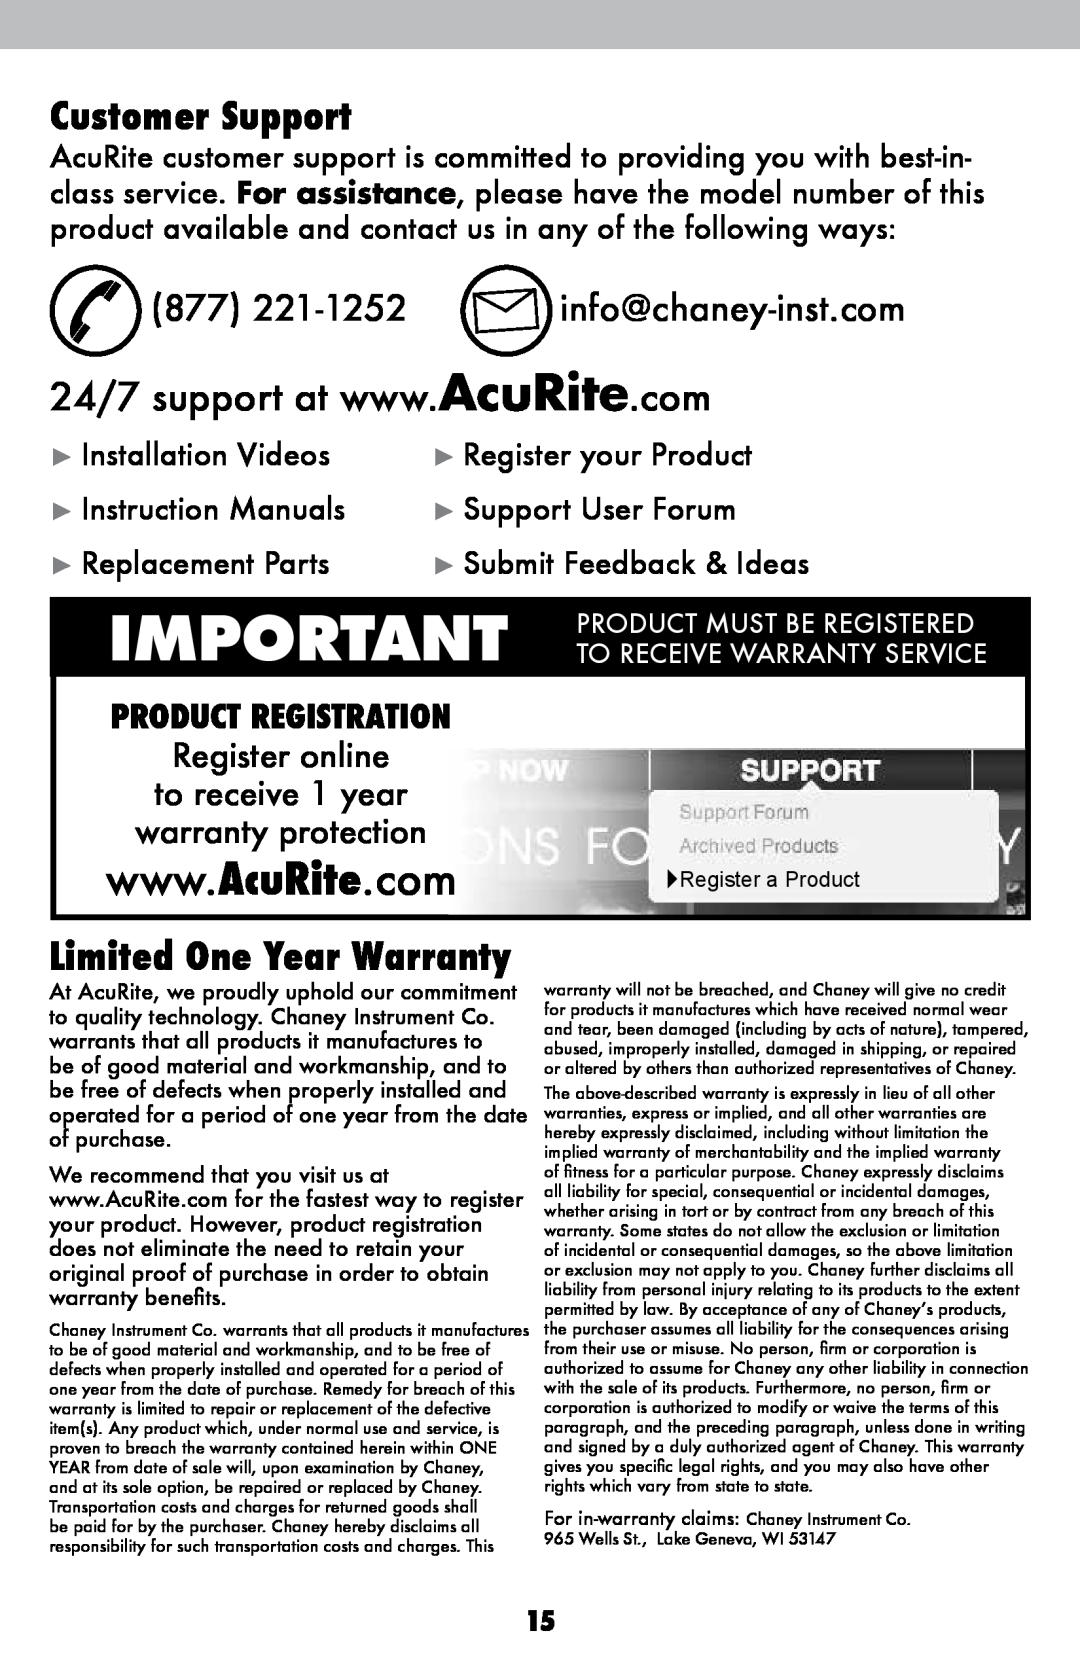 Acu-Rite 2048 Customer Support, 877 221-1252 info@chaney-inst.com, Limited One Year Warranty, Register online 